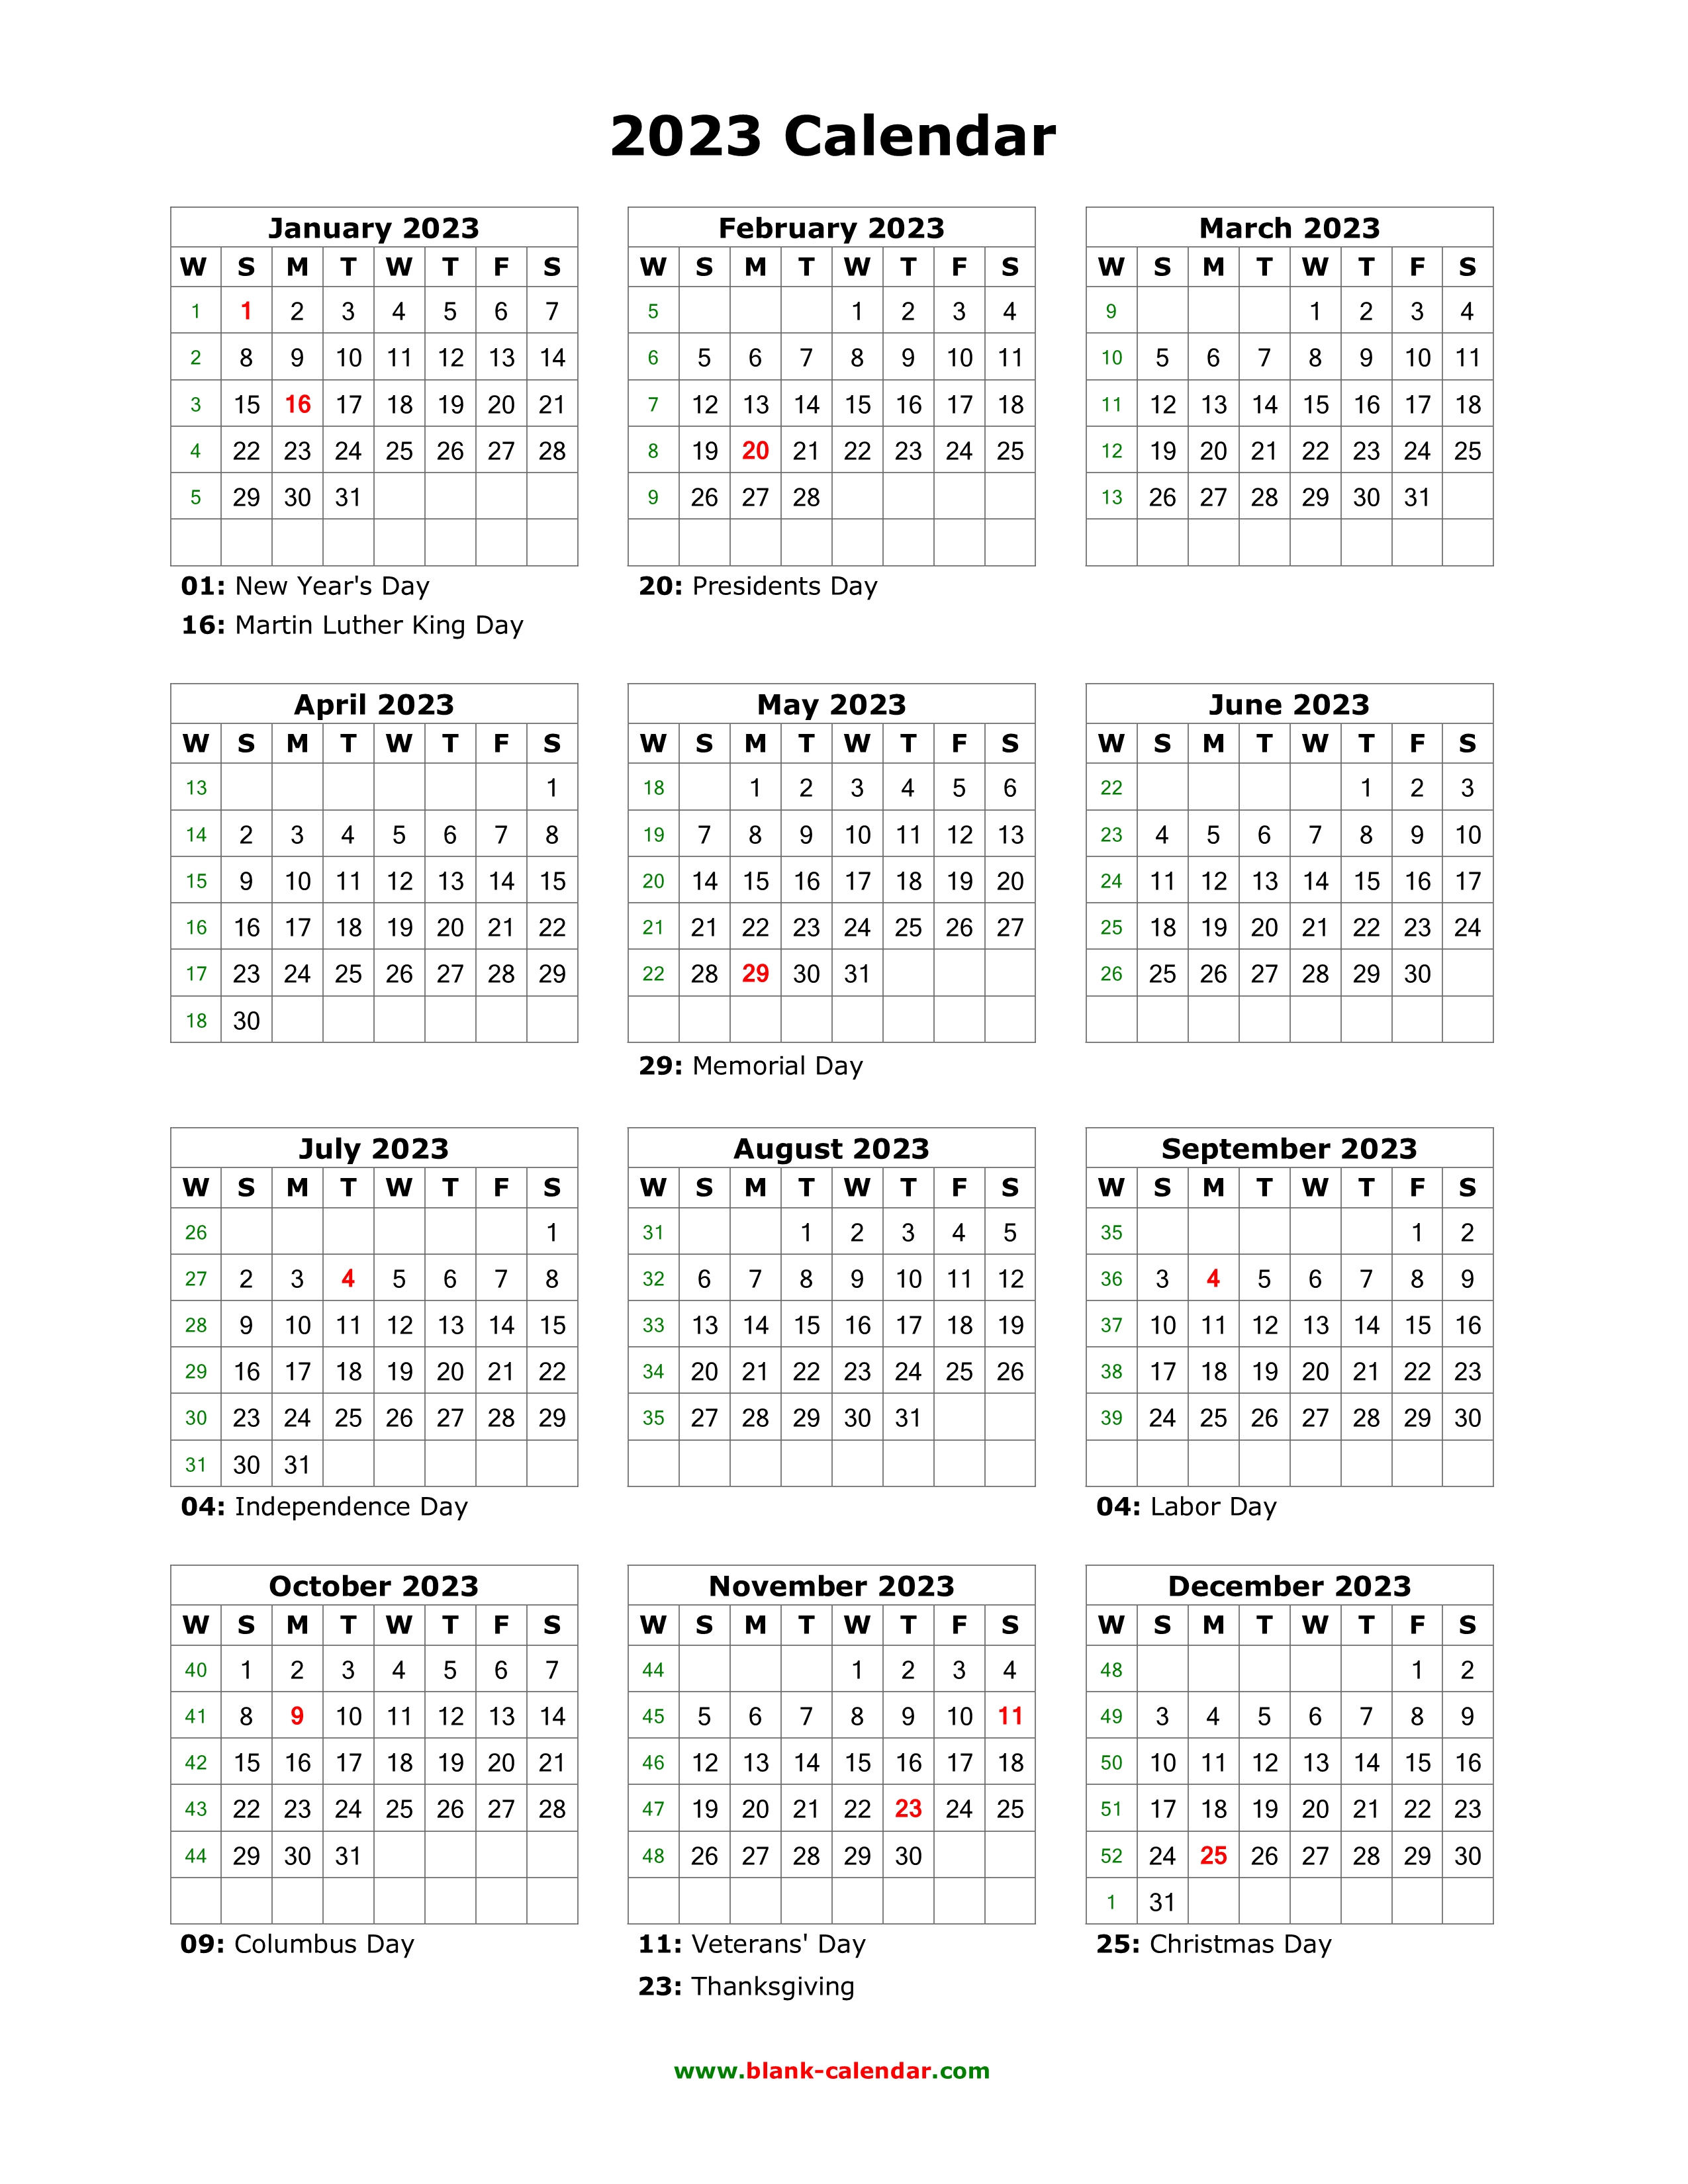 download-blank-calendar-2023-with-us-holidays-12-months-on-one-page